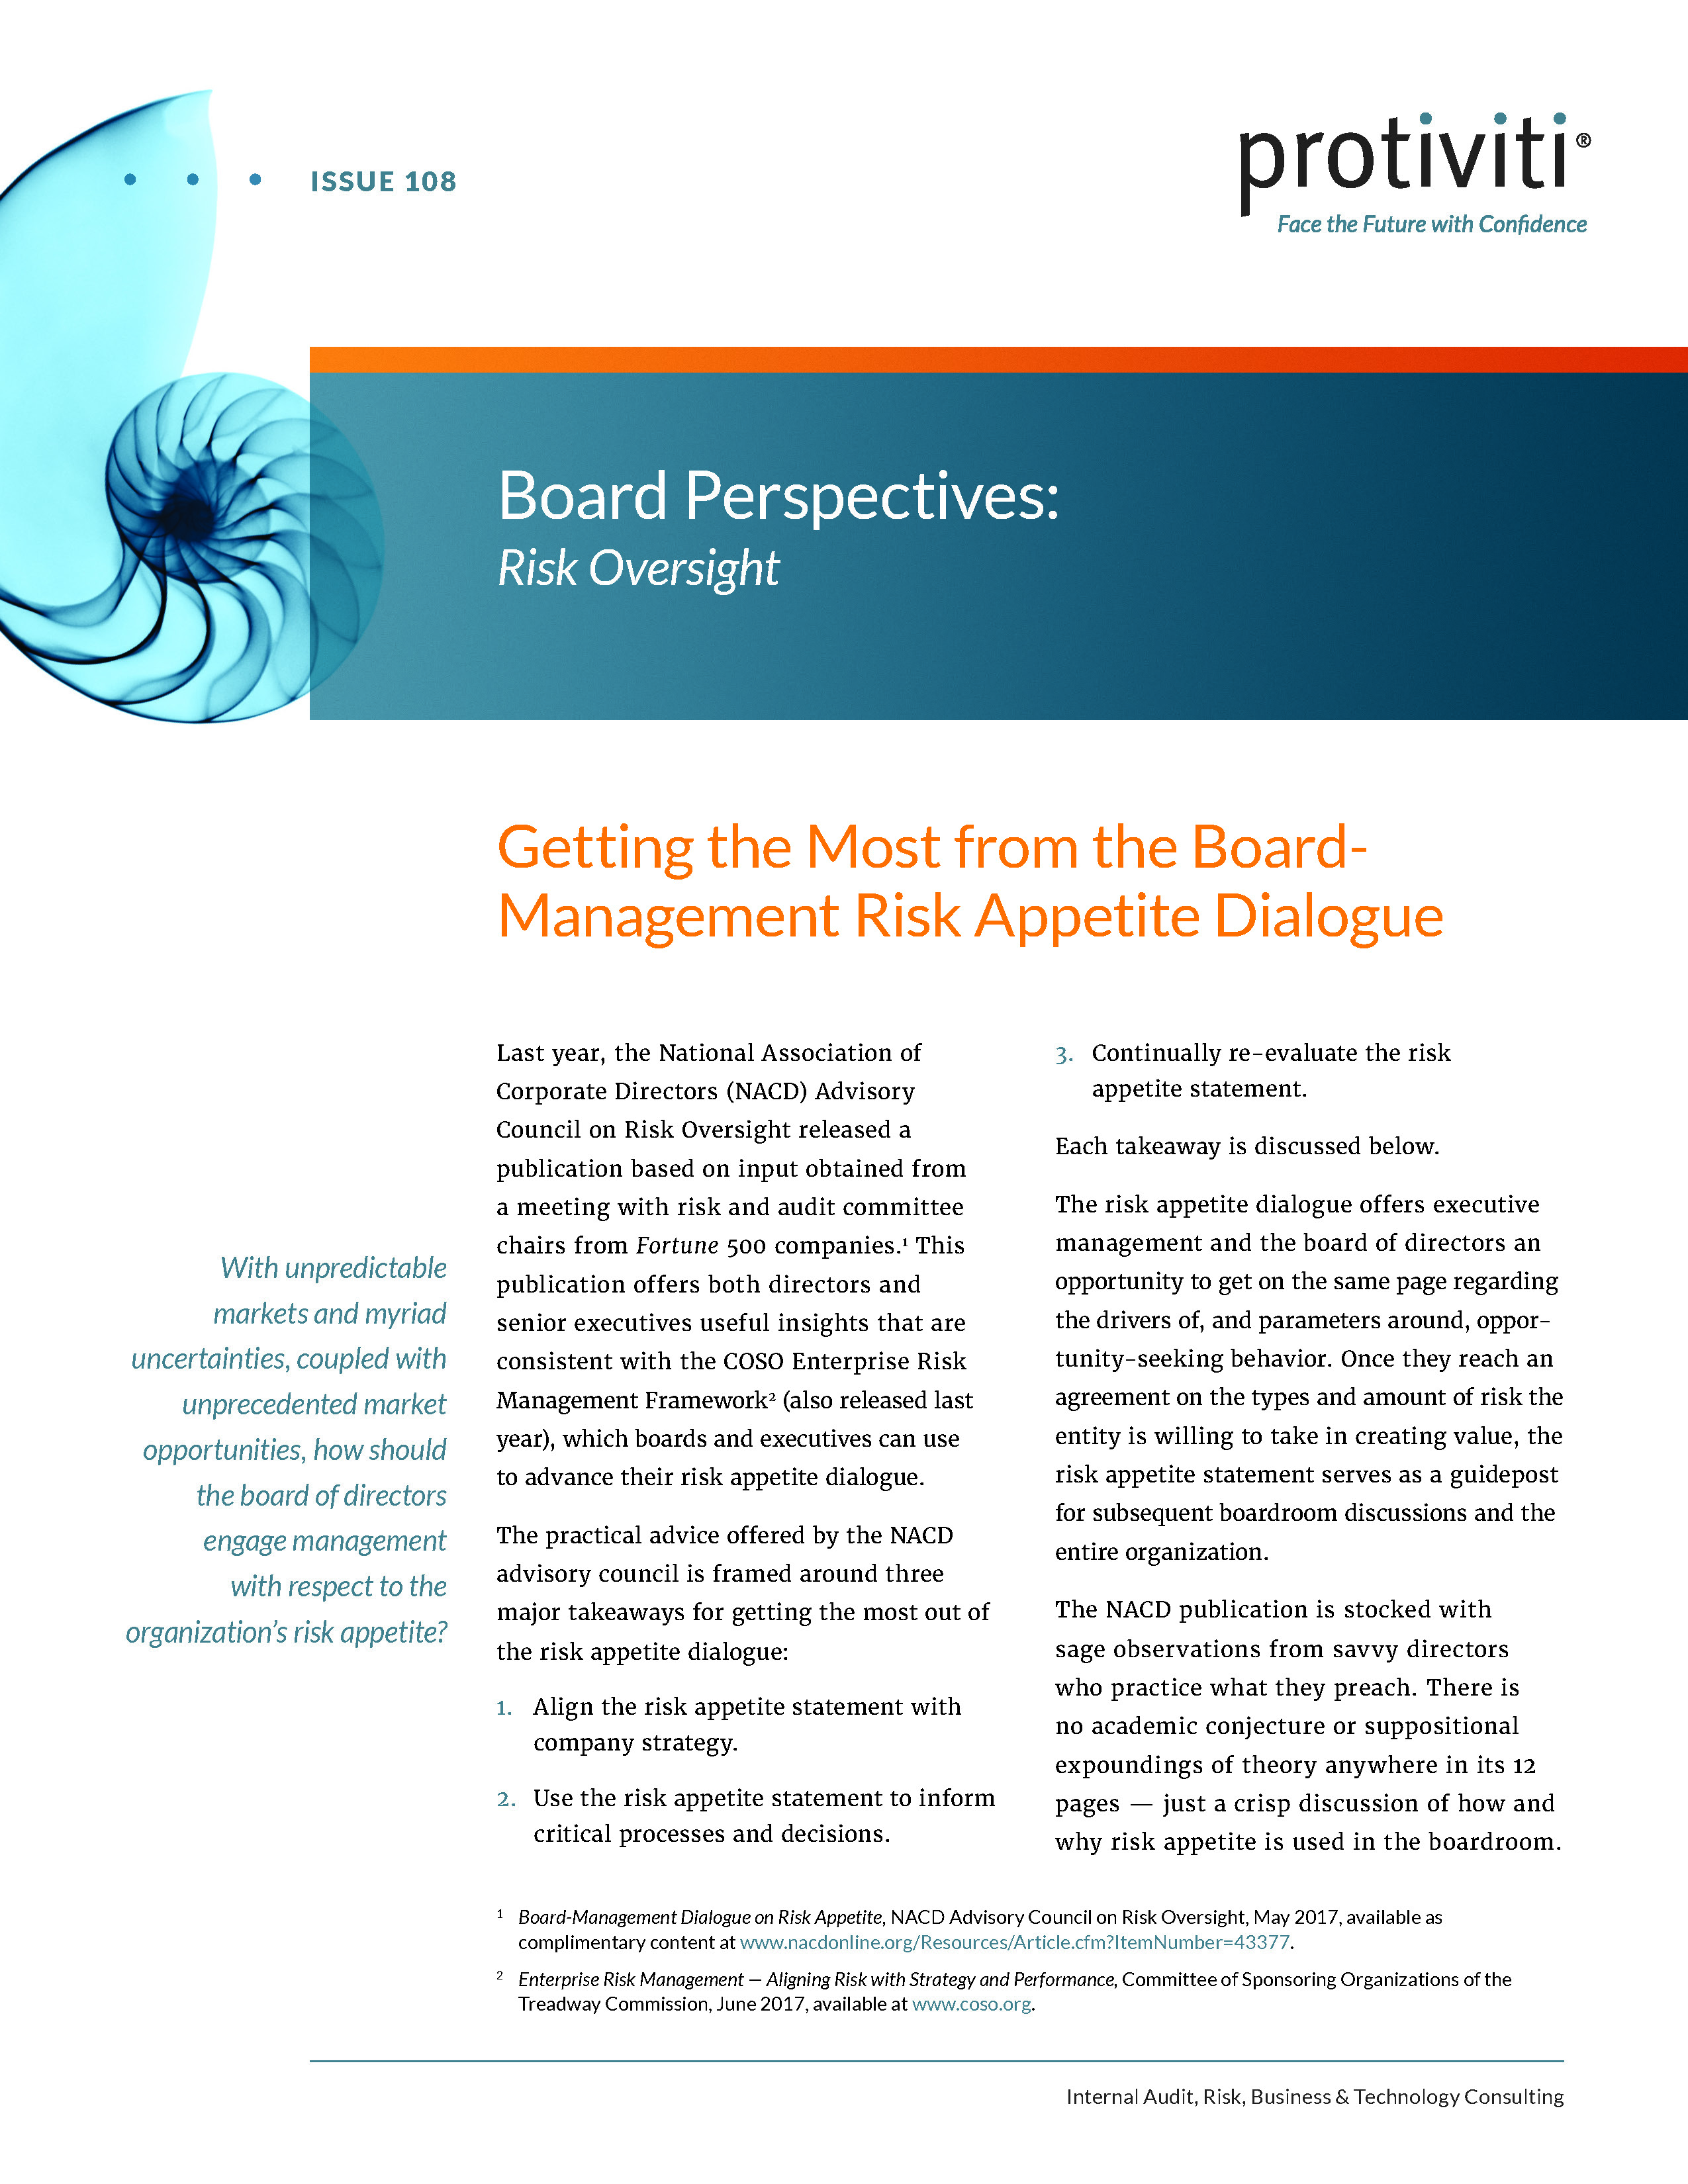 Screenshot of the first page of Getting the Most from the Board-Management Risk Appetite Dialogue – Board Perspectives Risk Oversight, Issue 108